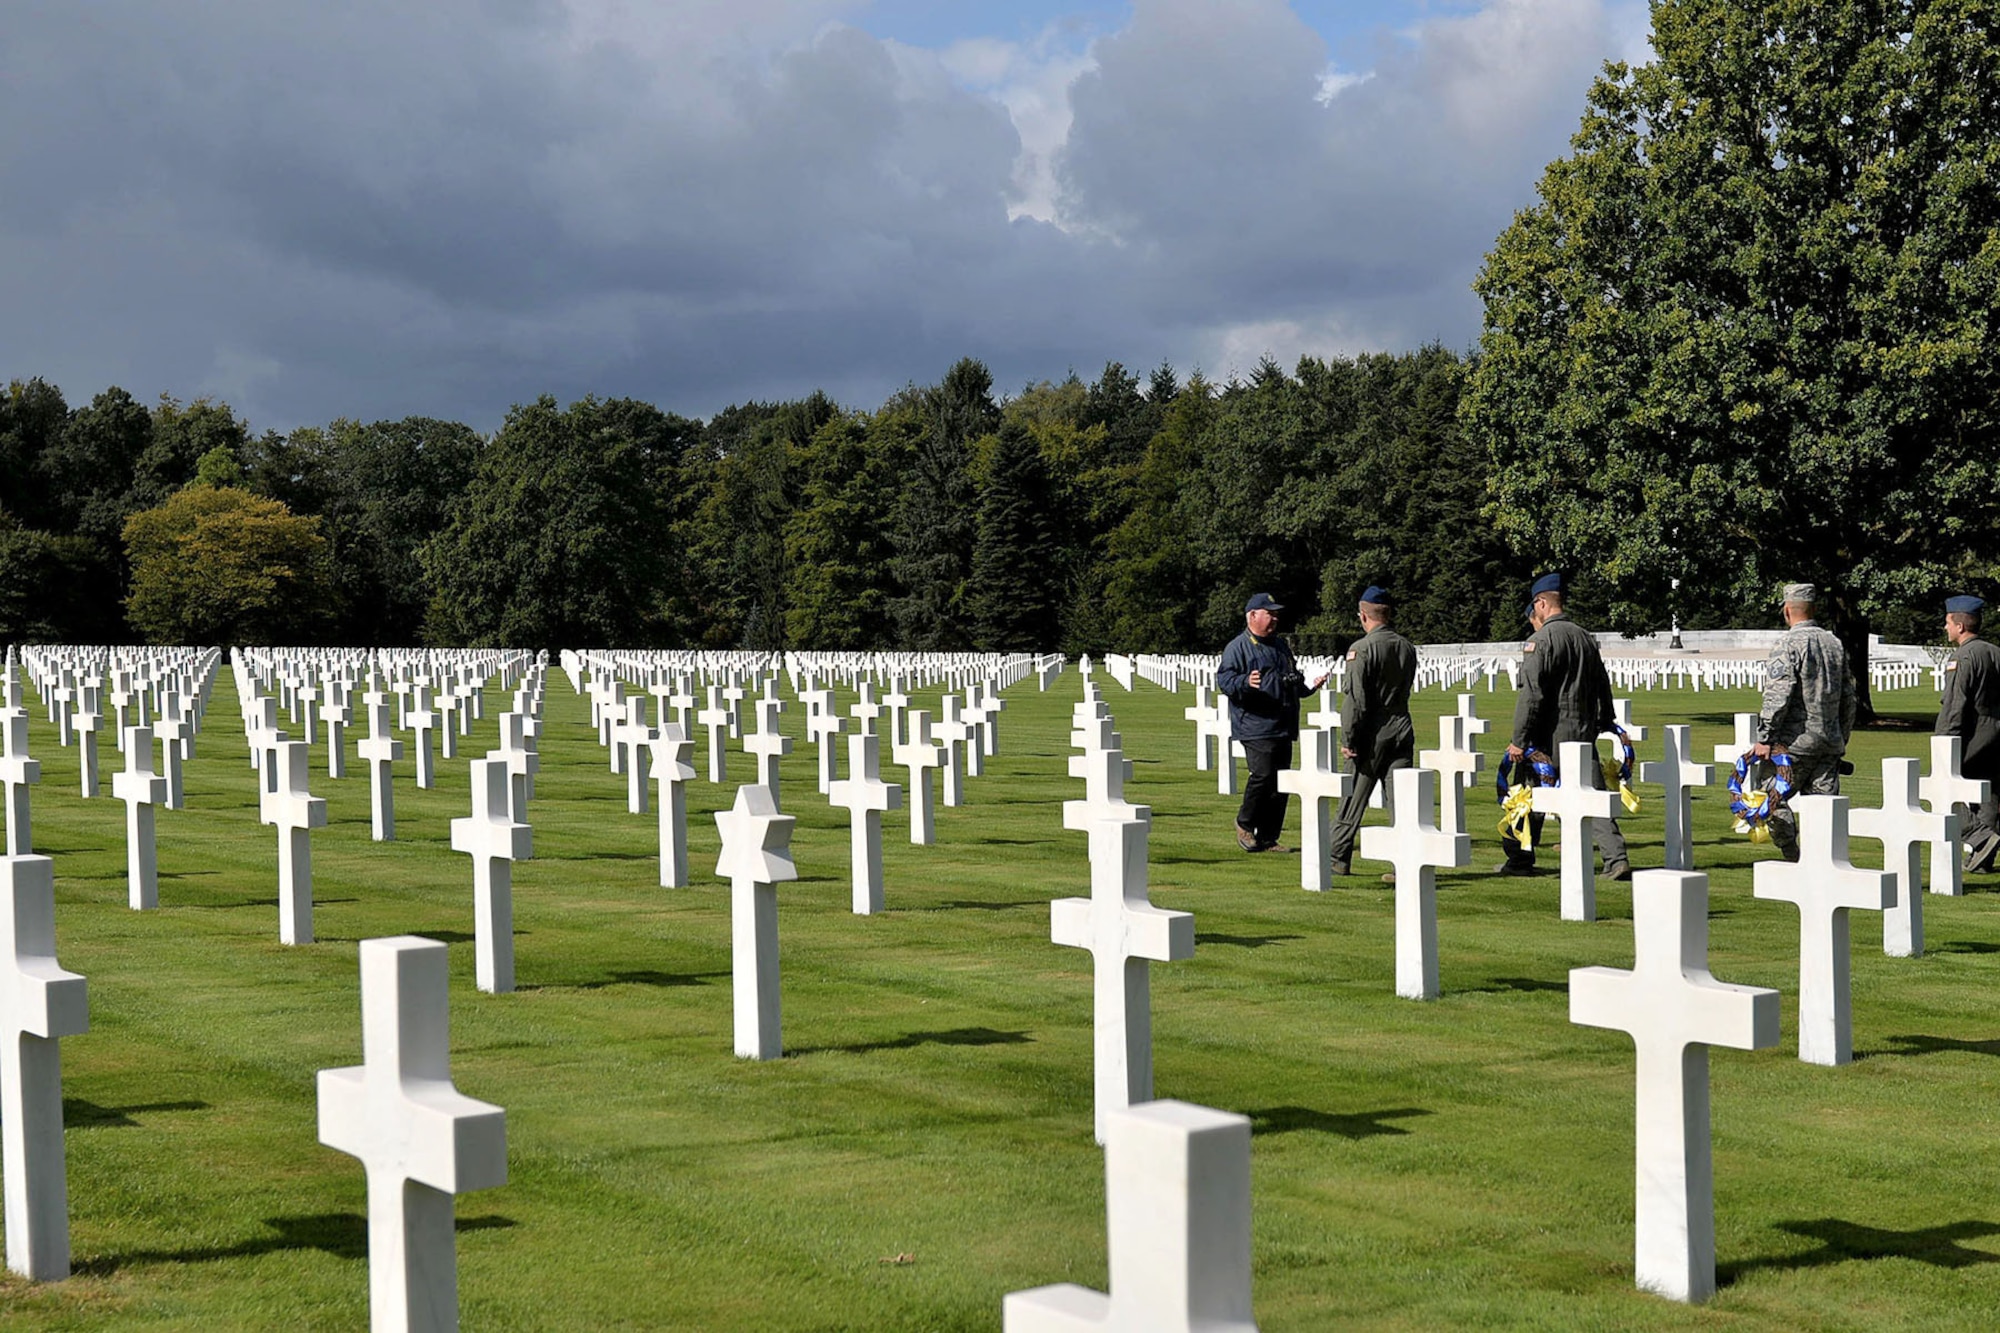 U.S Air Force members form Little Rock Air Force Base, Ark., get to know the history of the grounds at Ardennes American Military Cemetery in Neupre, Belgium, before a wreath laying ceremony Sept. 12, 2017. The ceremony honored several squadrons from WWII that have roots back to current units at Little Rock AFB. (U.S. Air Force photo by Airman 1st Class Codie Collins)